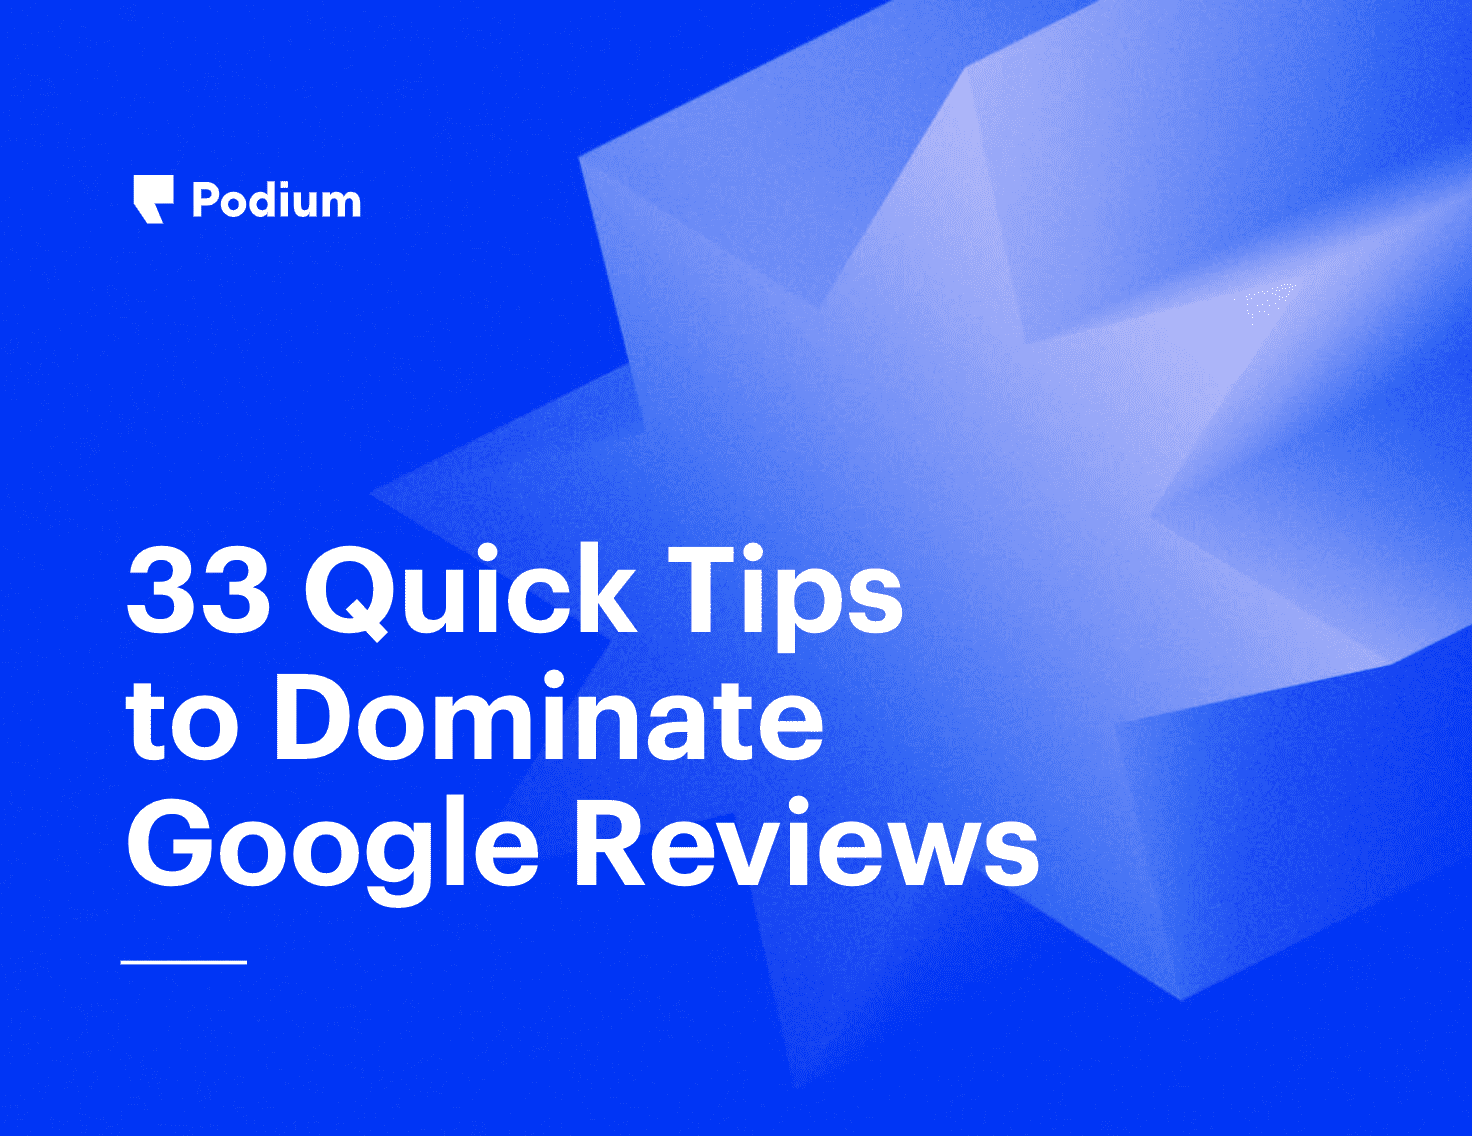 33 Quick Tips to Dominate Google Reviews